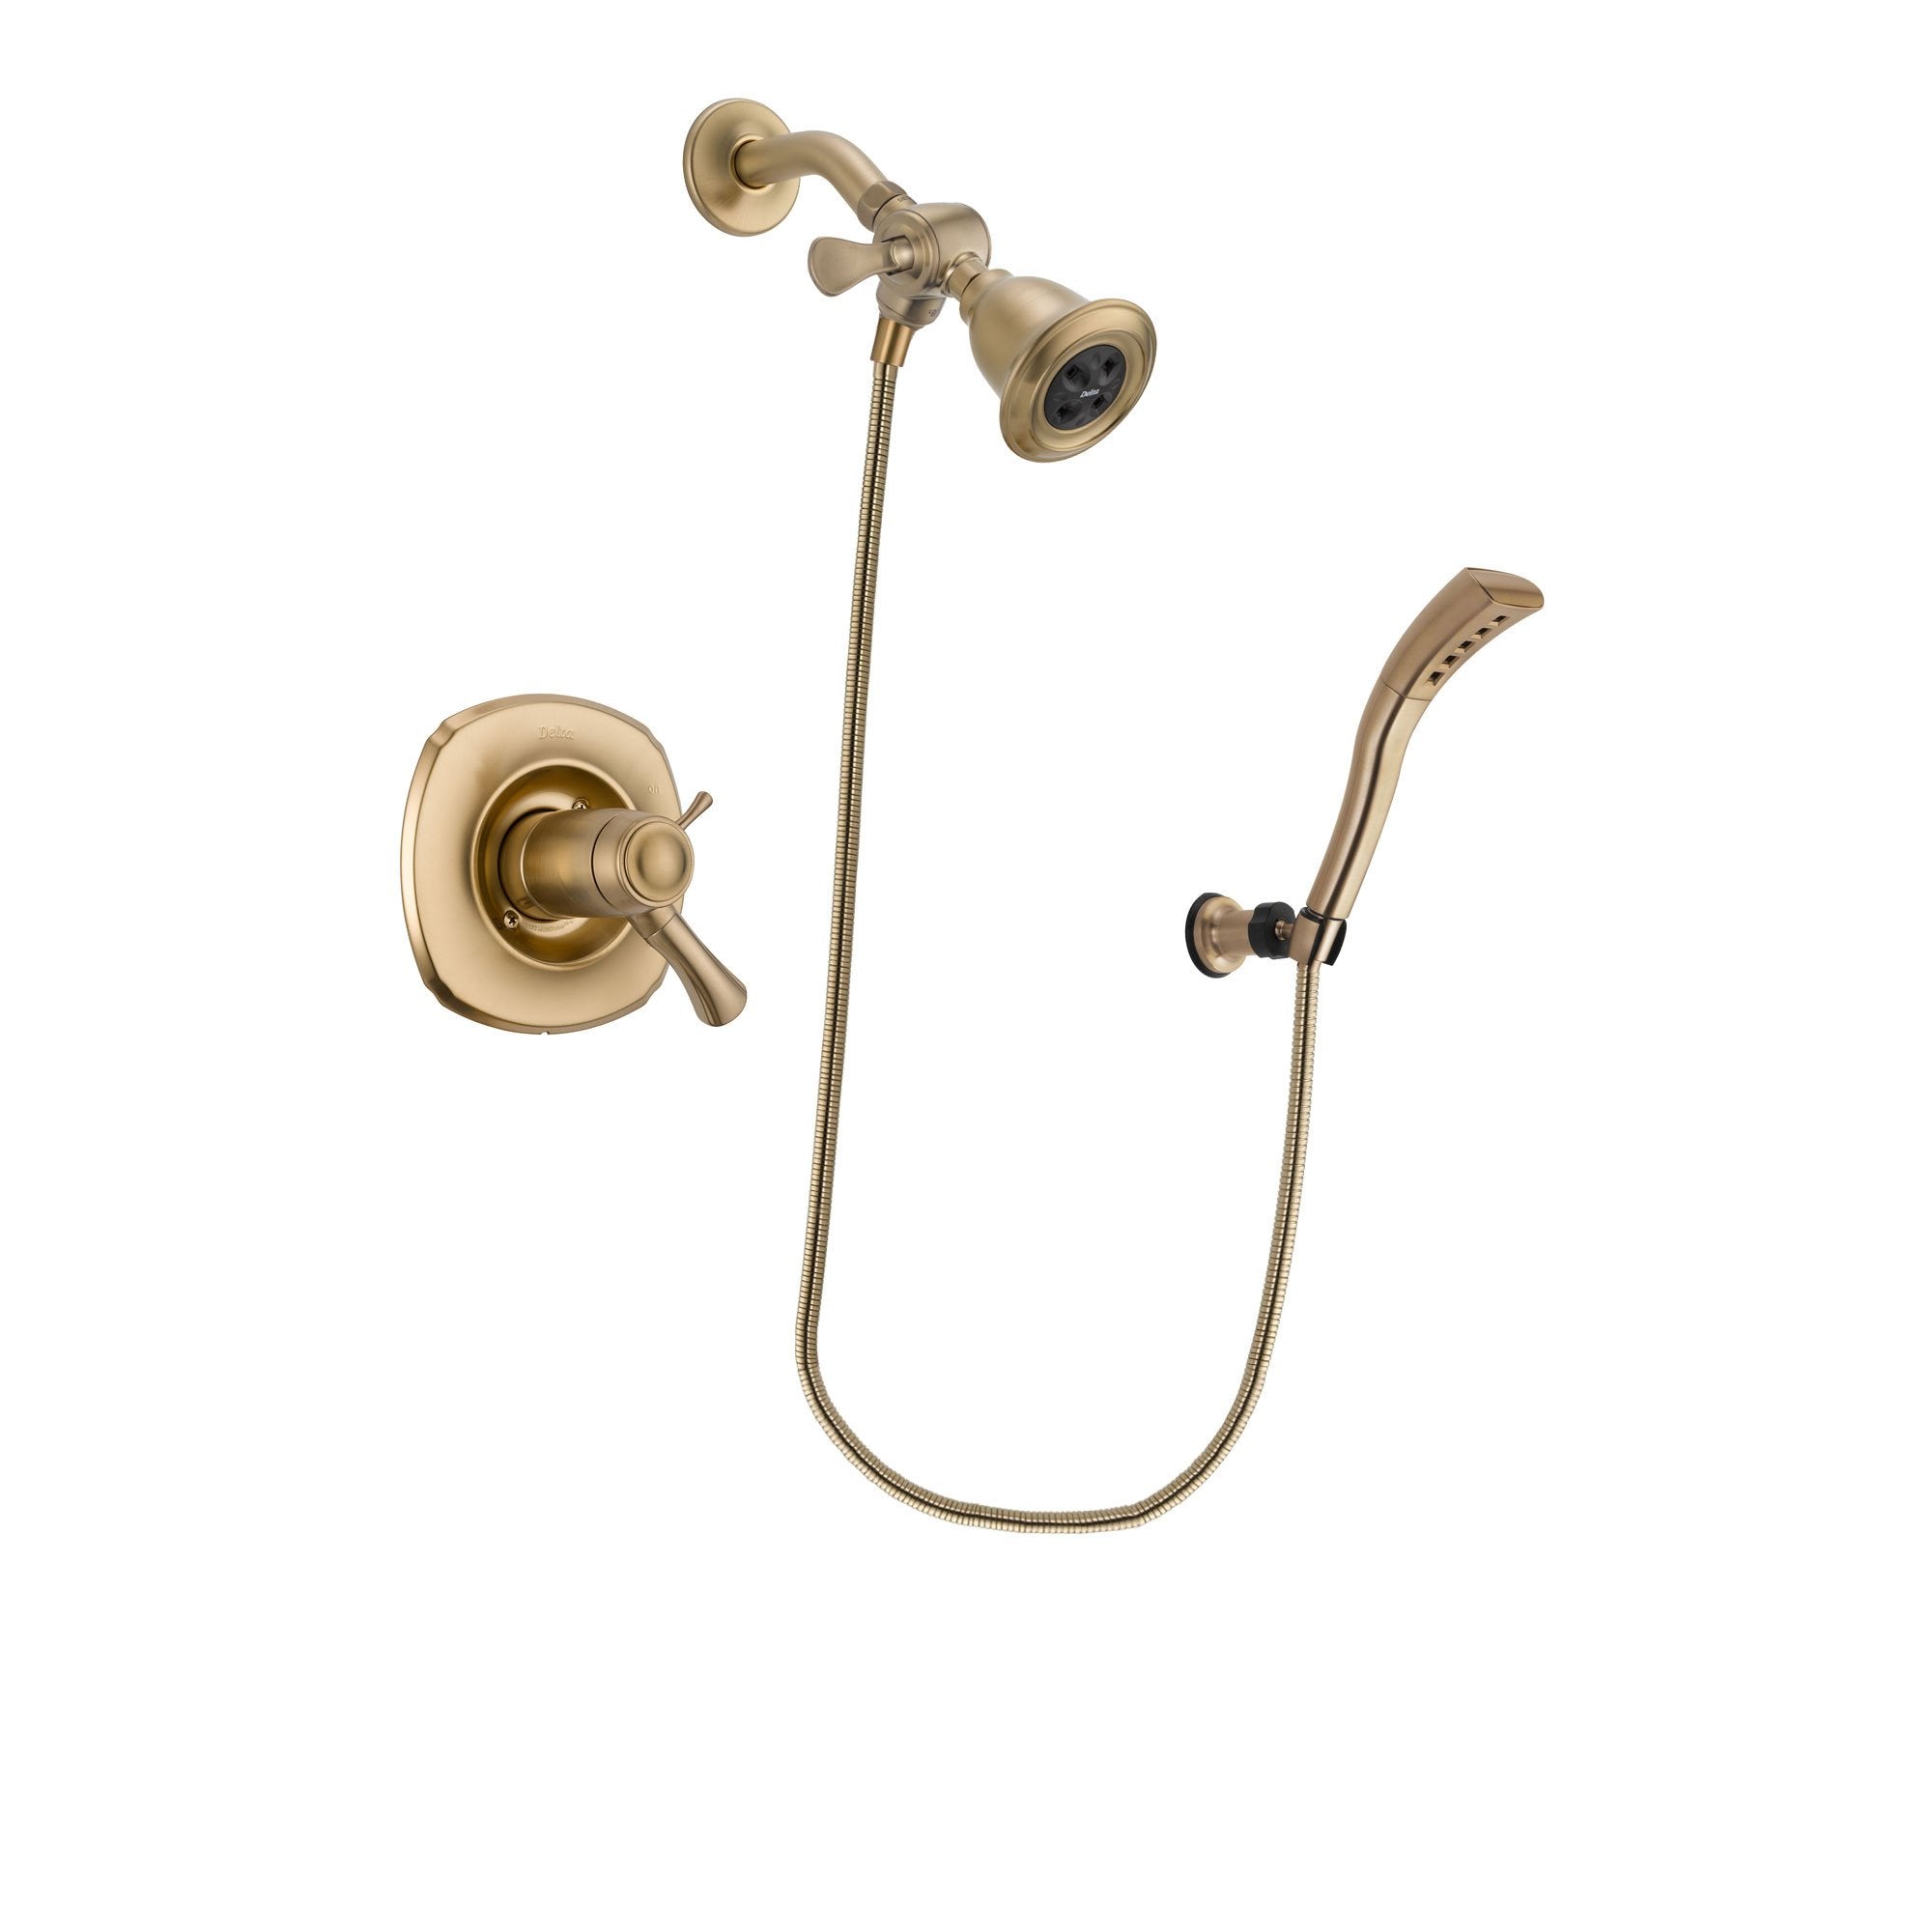 Delta Addison Champagne Bronze Finish Thermostatic Shower Faucet System Package with Water Efficient Showerhead and Modern Wall Mount Personal Handheld Shower Spray Includes Rough-in Valve DSP3660V